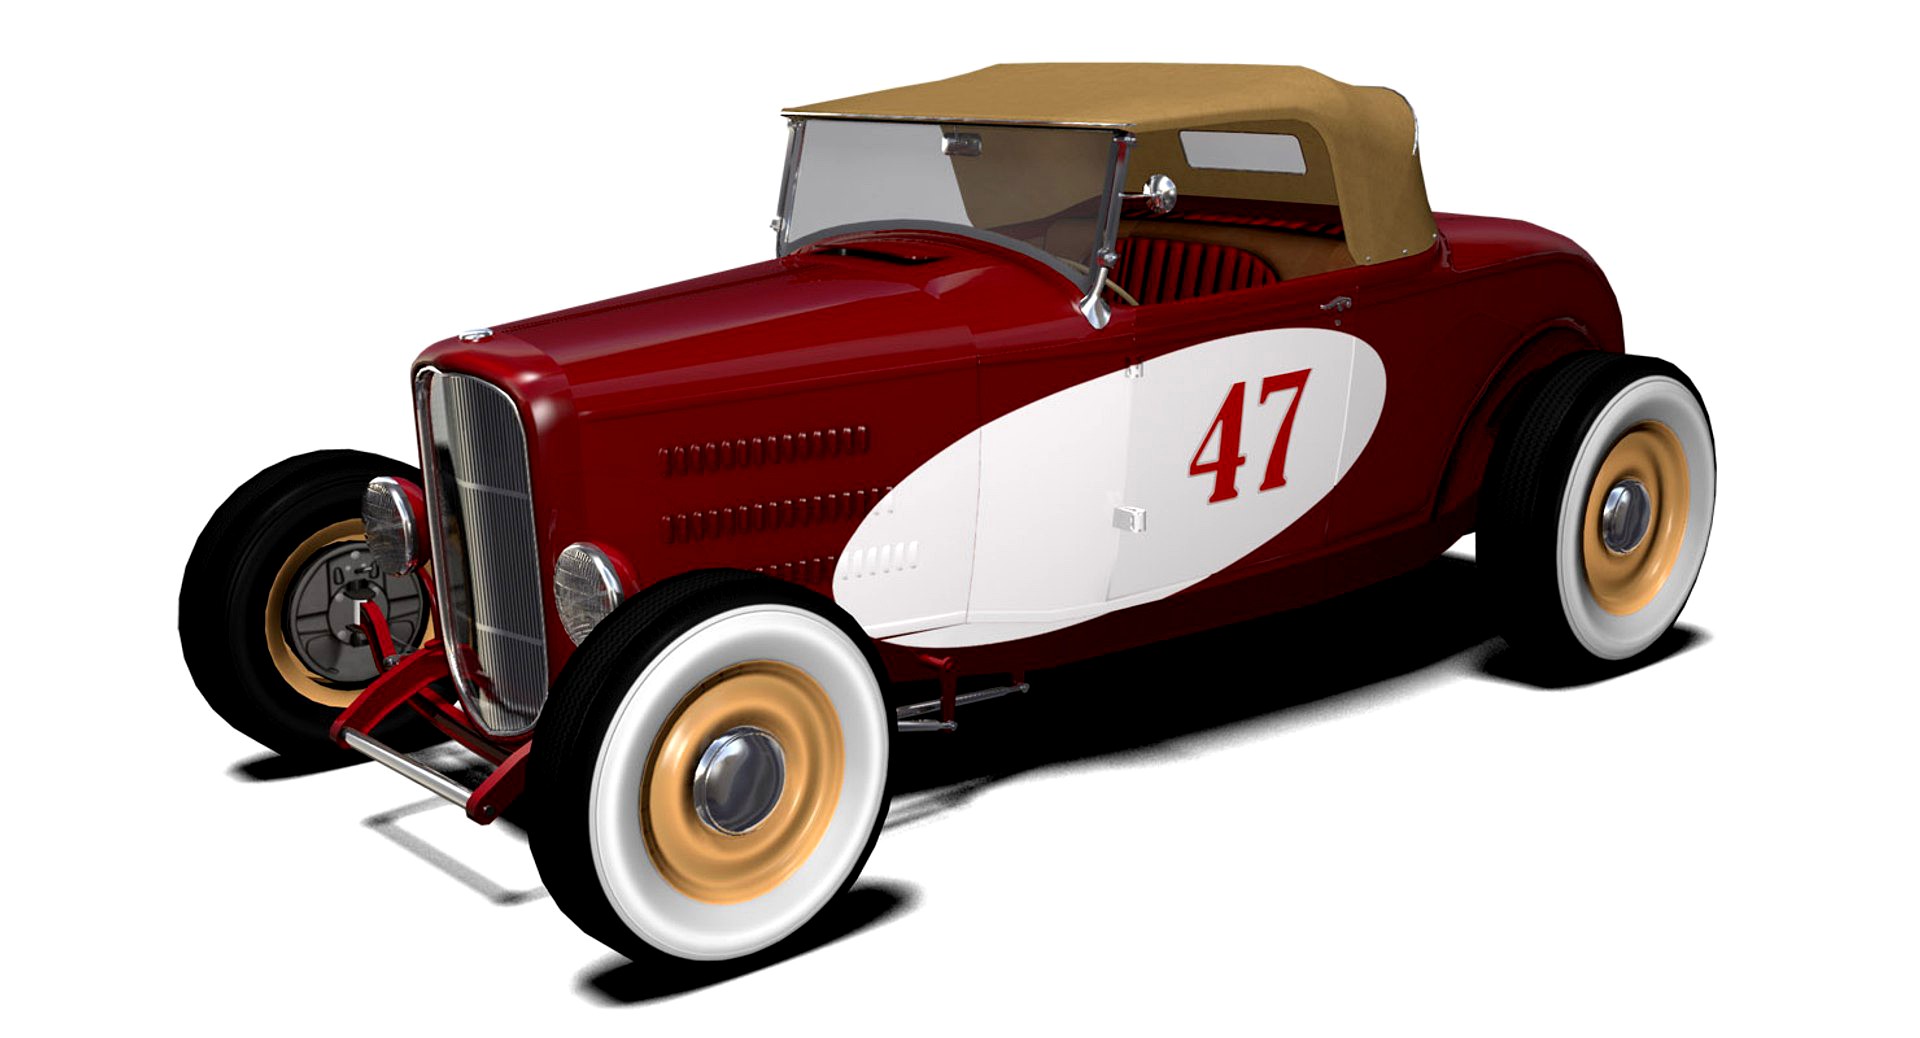 Hot Rod Roadster With Roof